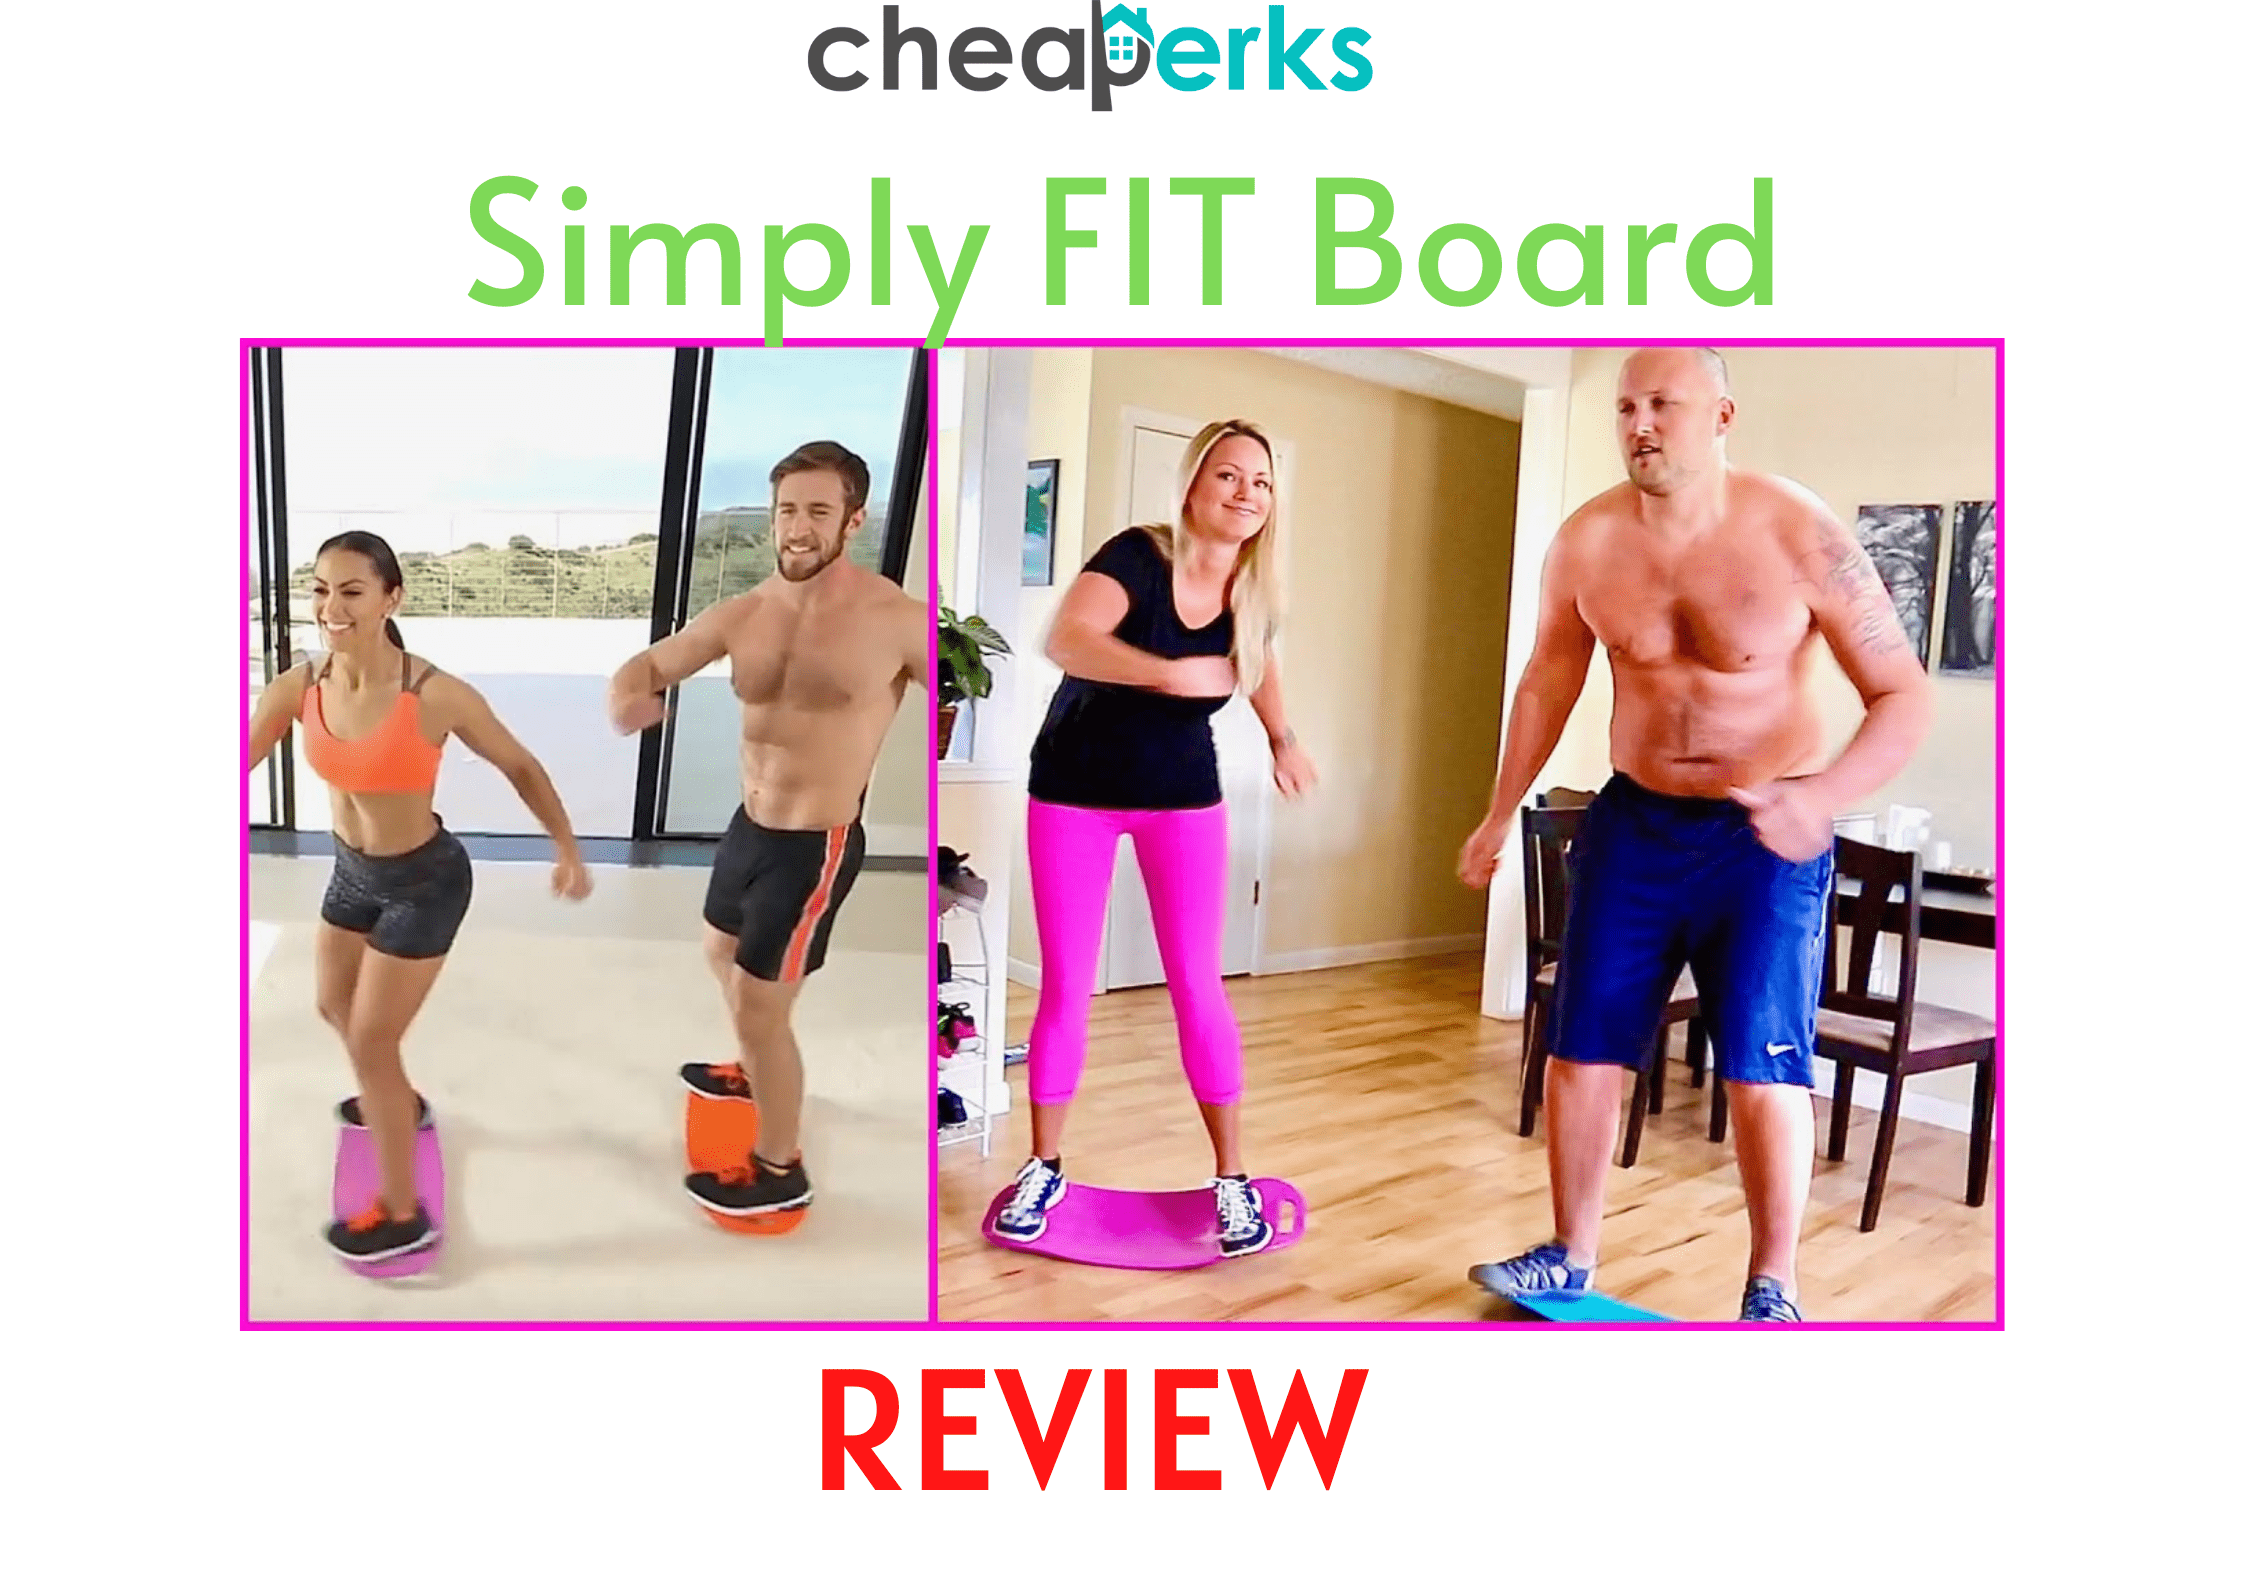 simply-fit-board-reviews-fake-toy-or-really-helps-cheaperks